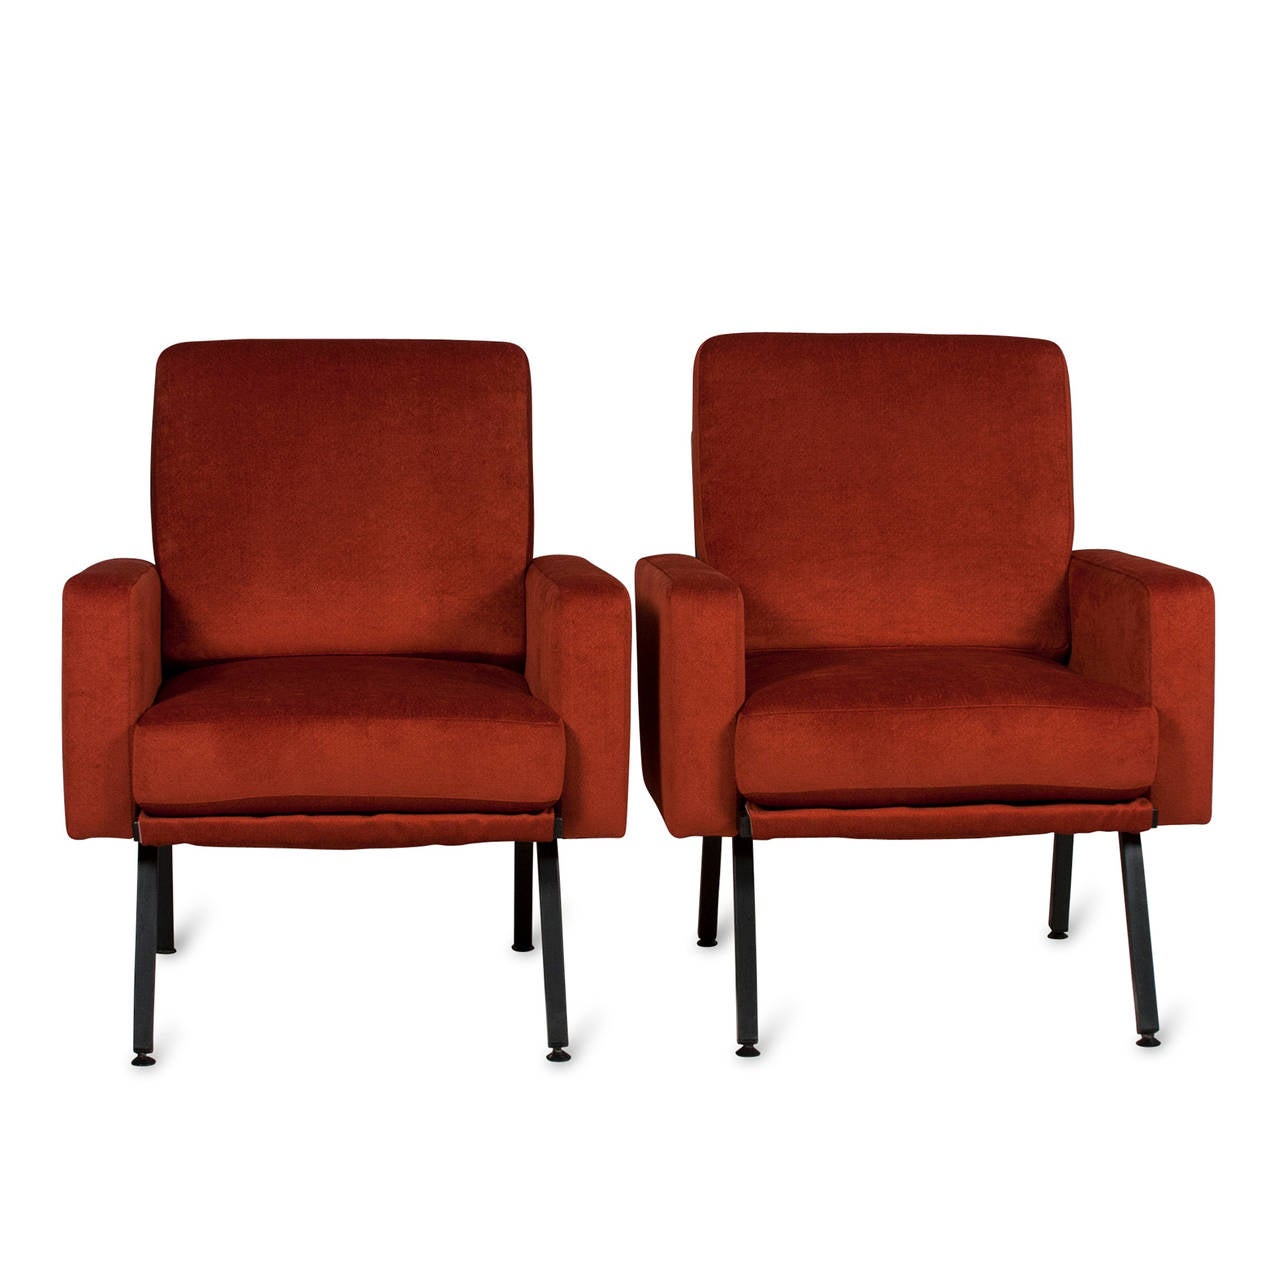 Mid-20th Century Pair of Guariche Style Armchairs, French, 1950s